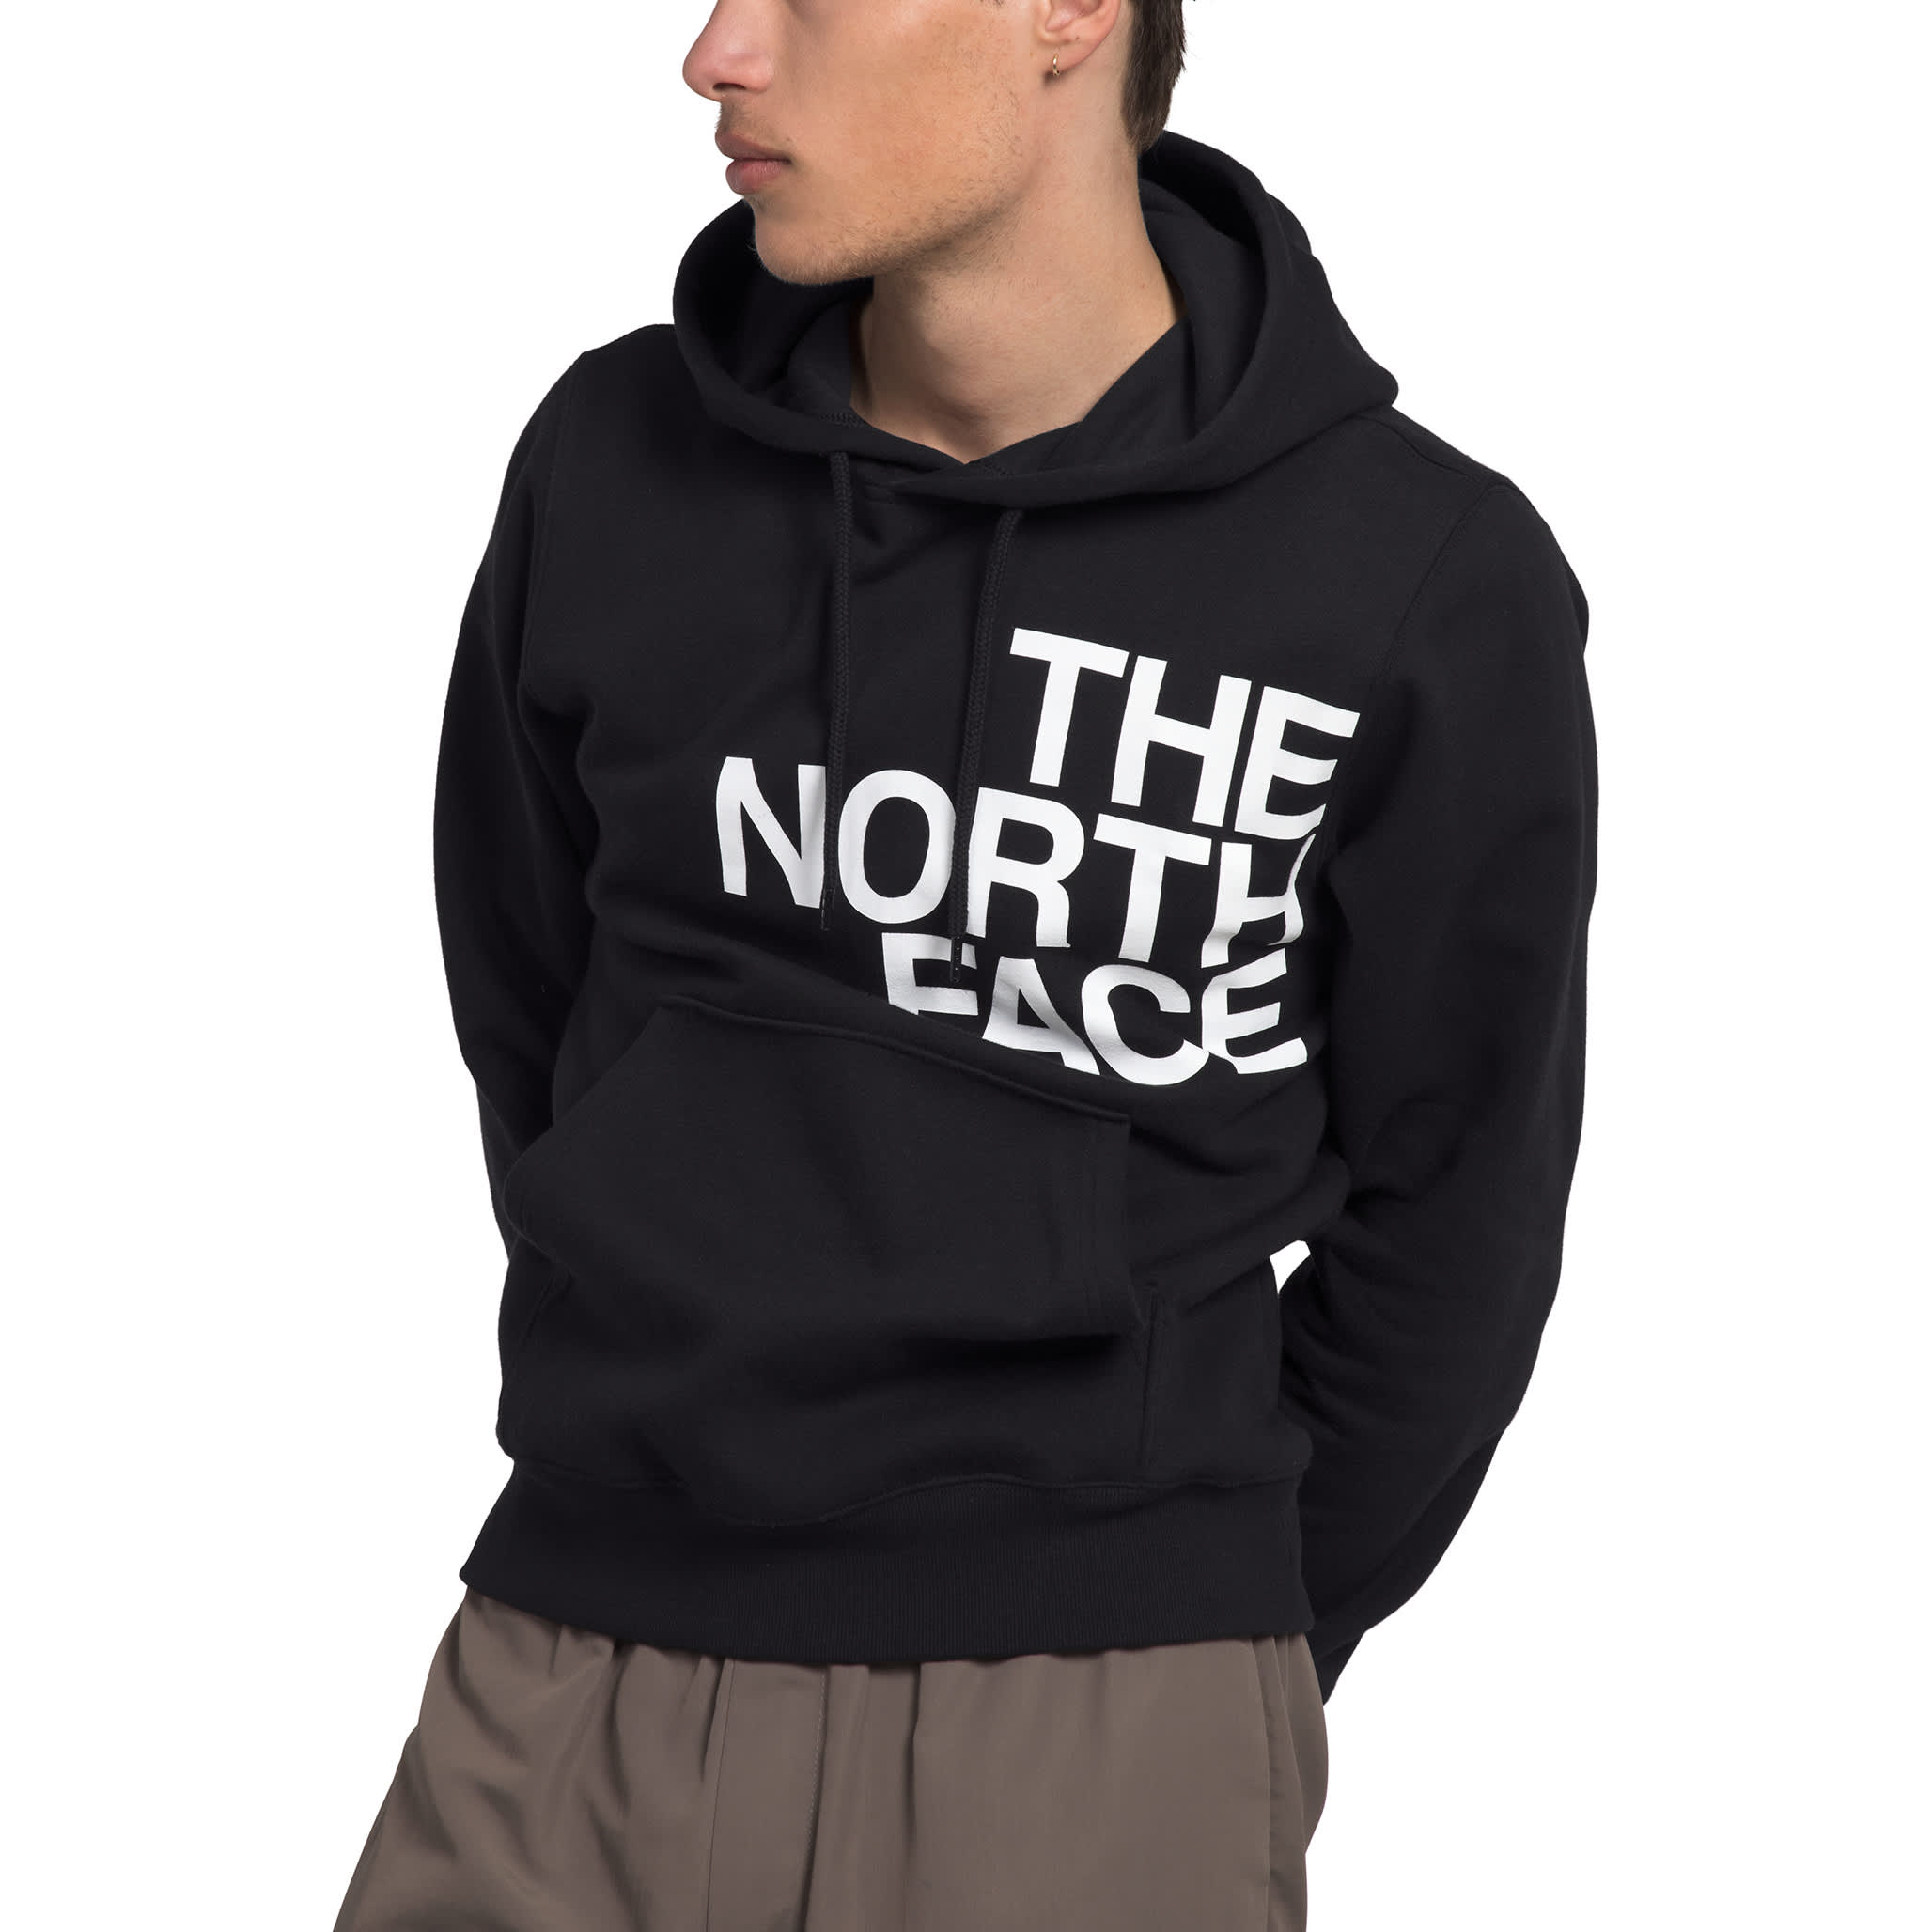 The North Face® Men’s Brand Proud Hoodie